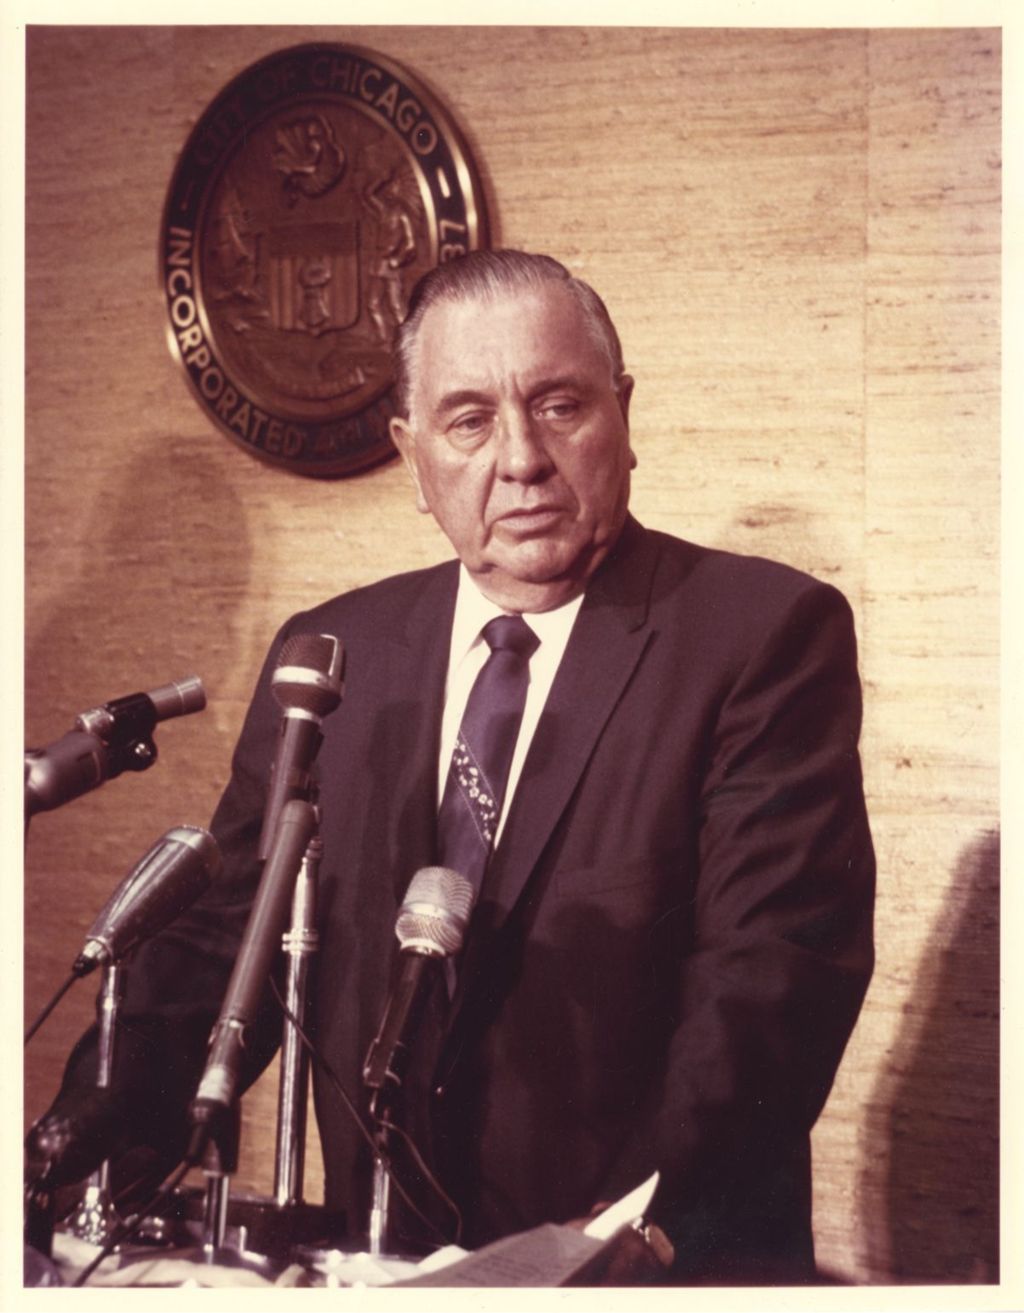 Miniature of Richard J. Daley at a podium with a bank of microphones